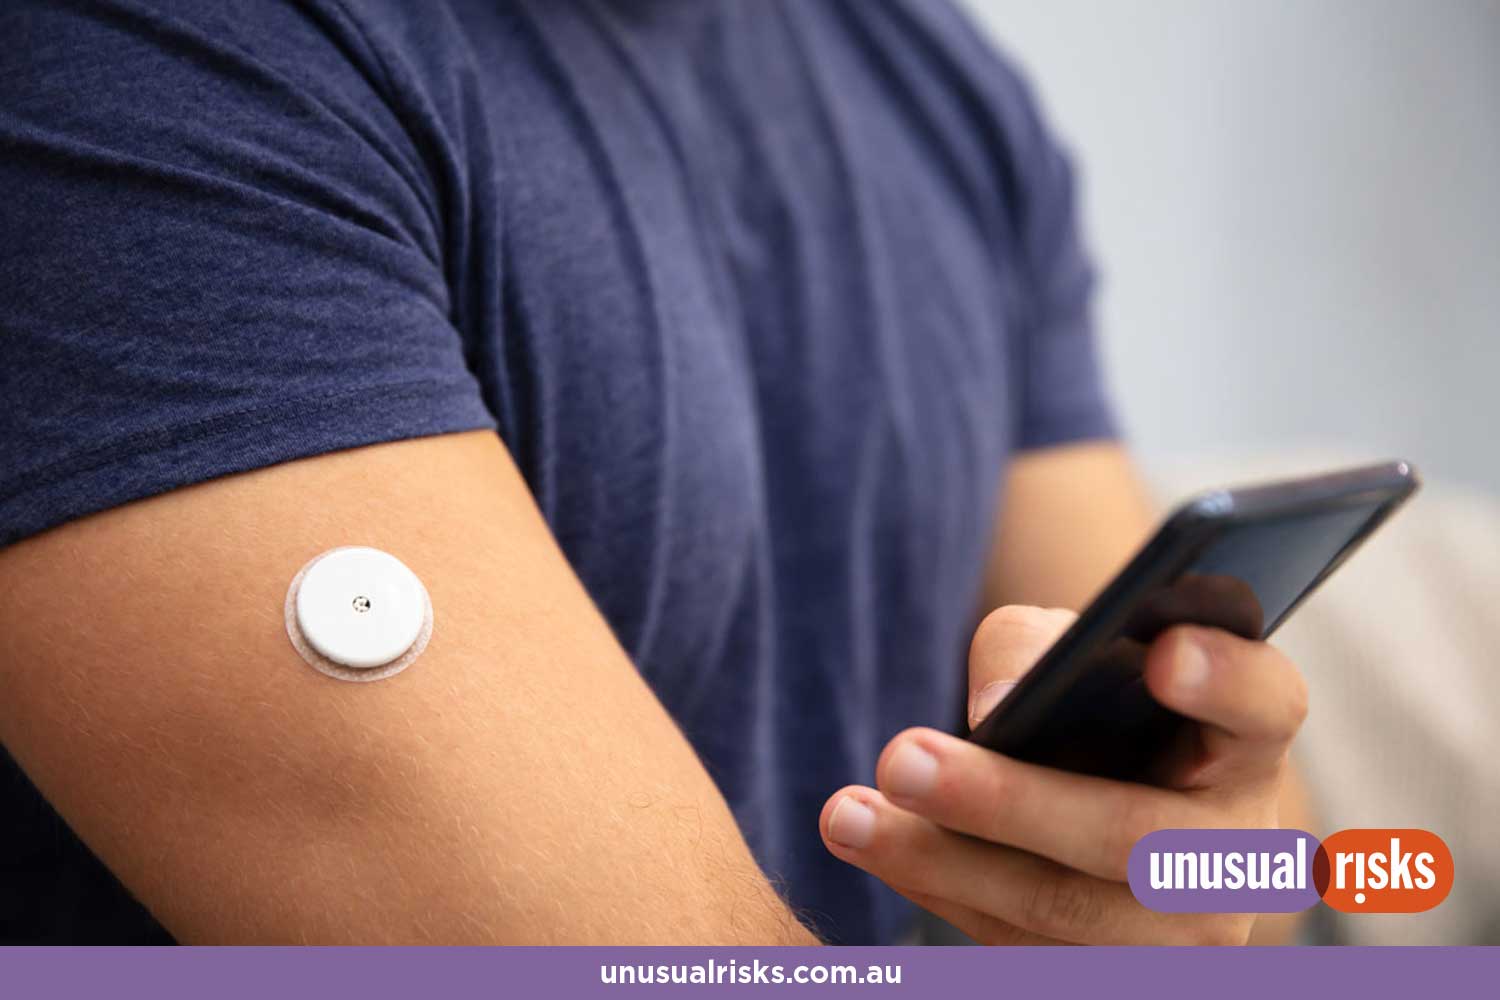 young man wearing an adhesive continuous glucose monitor (CGM) sensor to manage his insulin needs